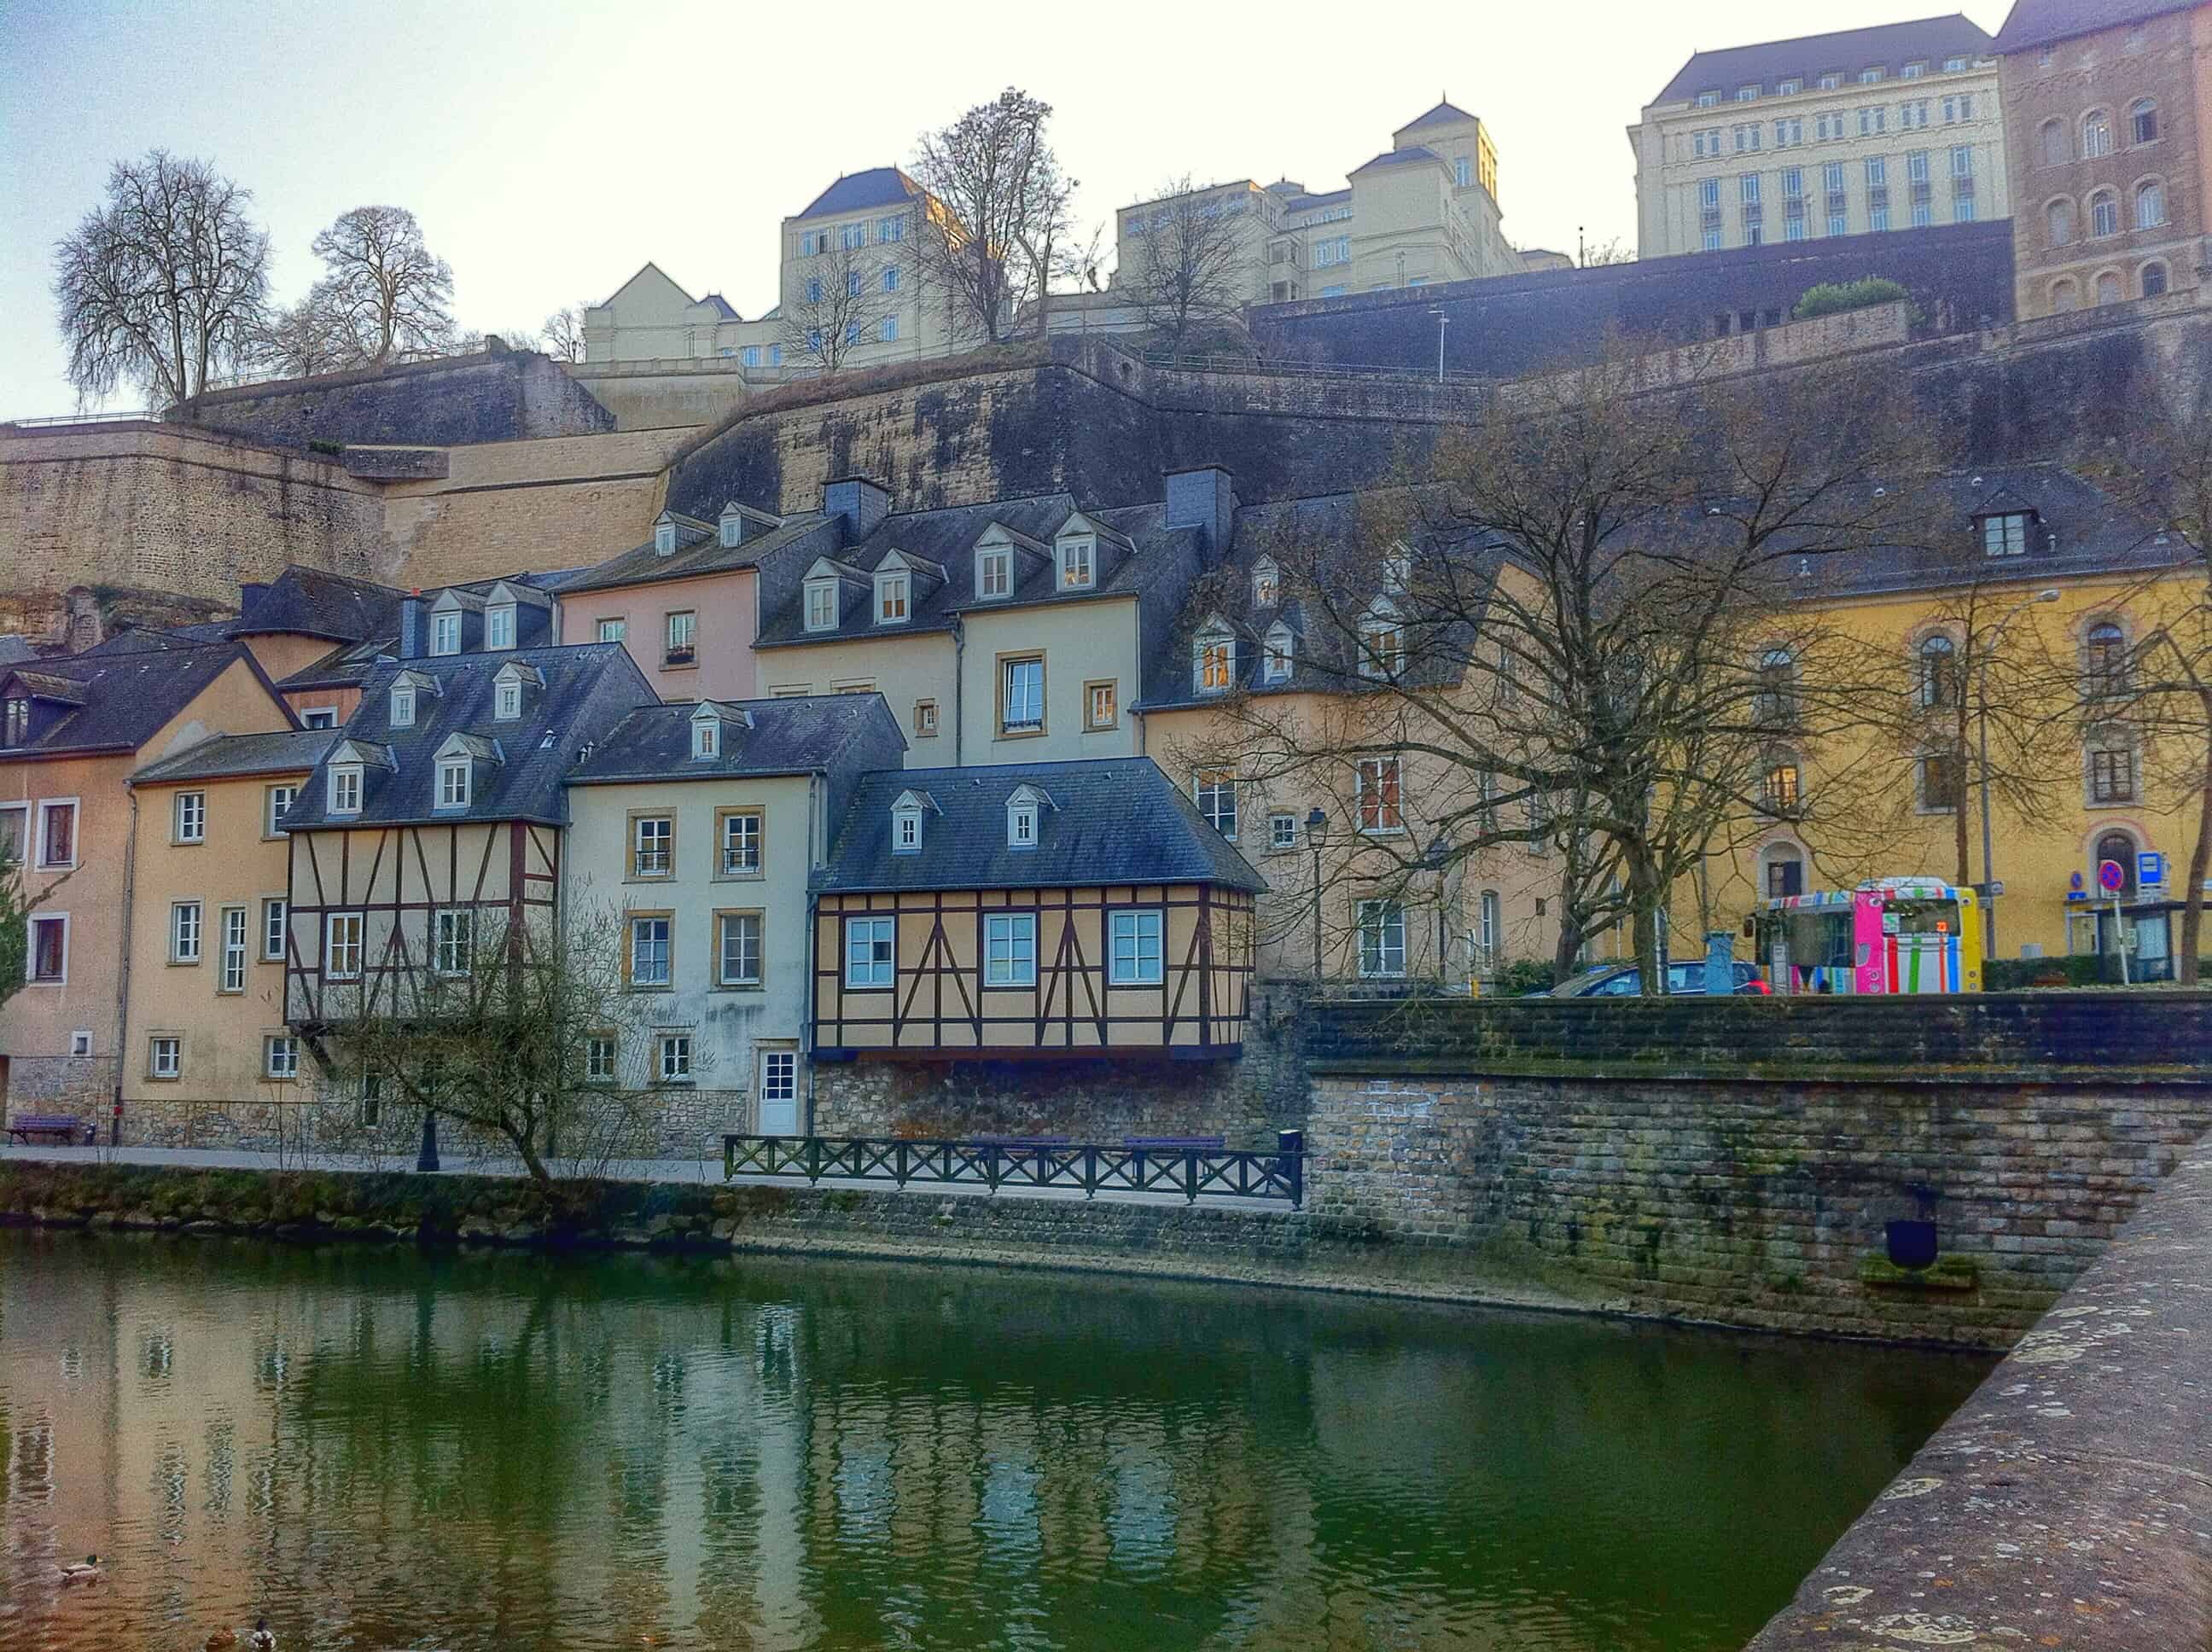 Luxembourg Worth Visiting? 5 Things To Do in Luxembourg City – Two Bad